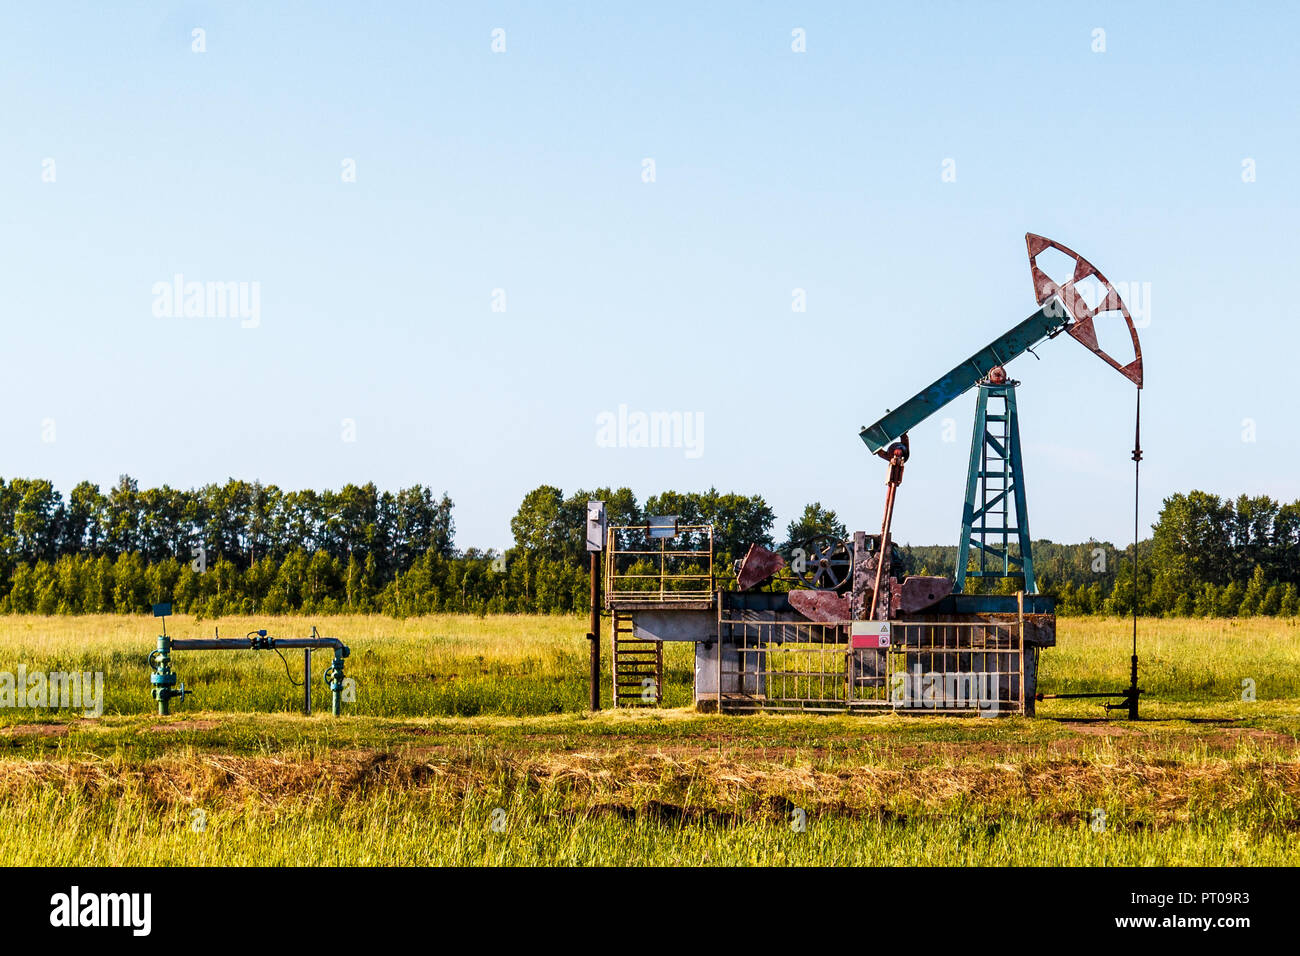 The oil pump works in summer in a green field against a background of green trees and a blue sky. Stock Photo